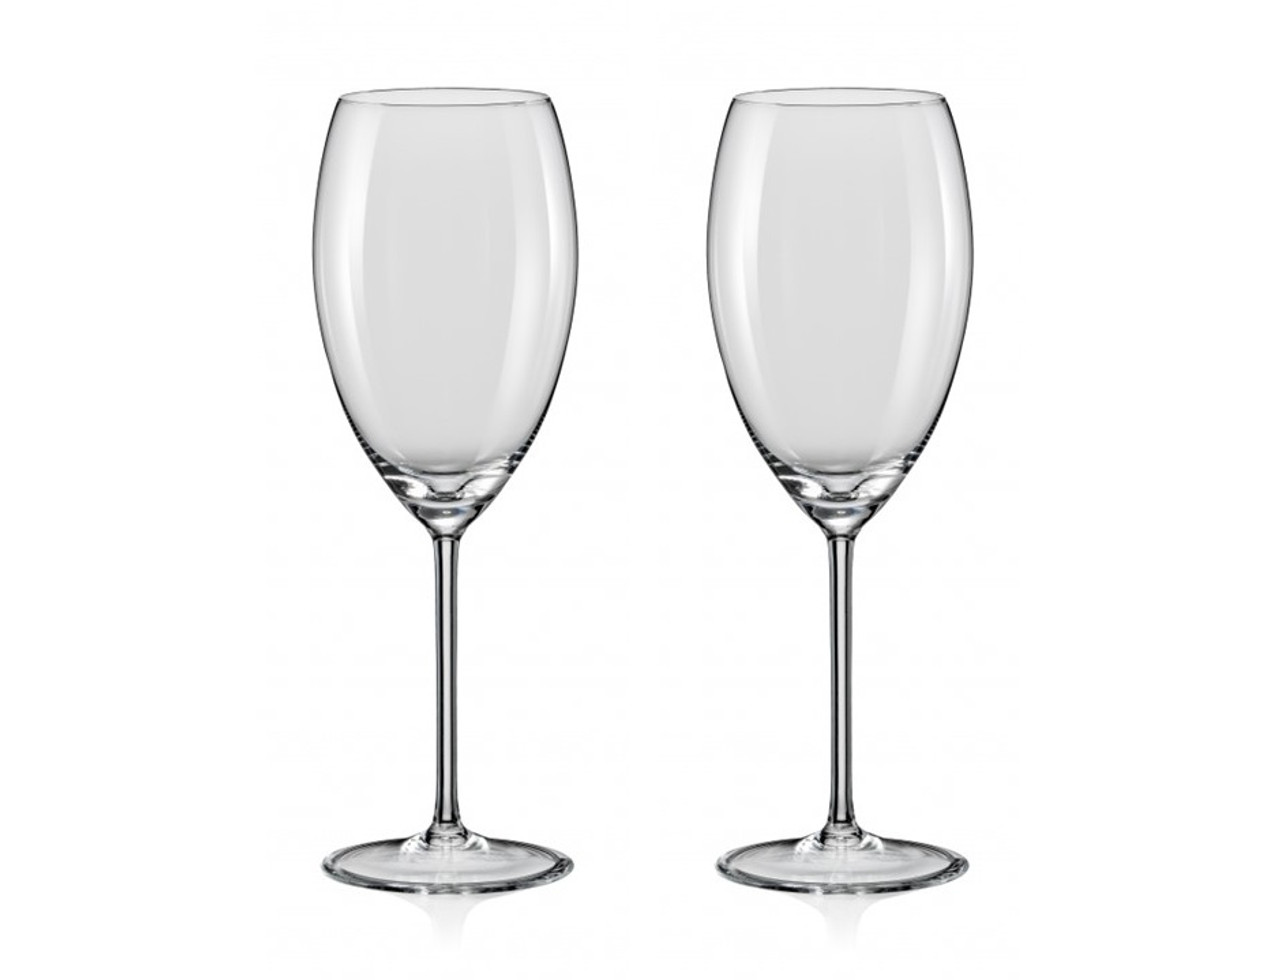 https://cdn11.bigcommerce.com/s-9mnzpxwffi/images/stencil/1280x1280/products/473/2599/Bohemia_Crystal_Clear_Thin_Wine_Glasses__57658.1618024325.jpg?c=2